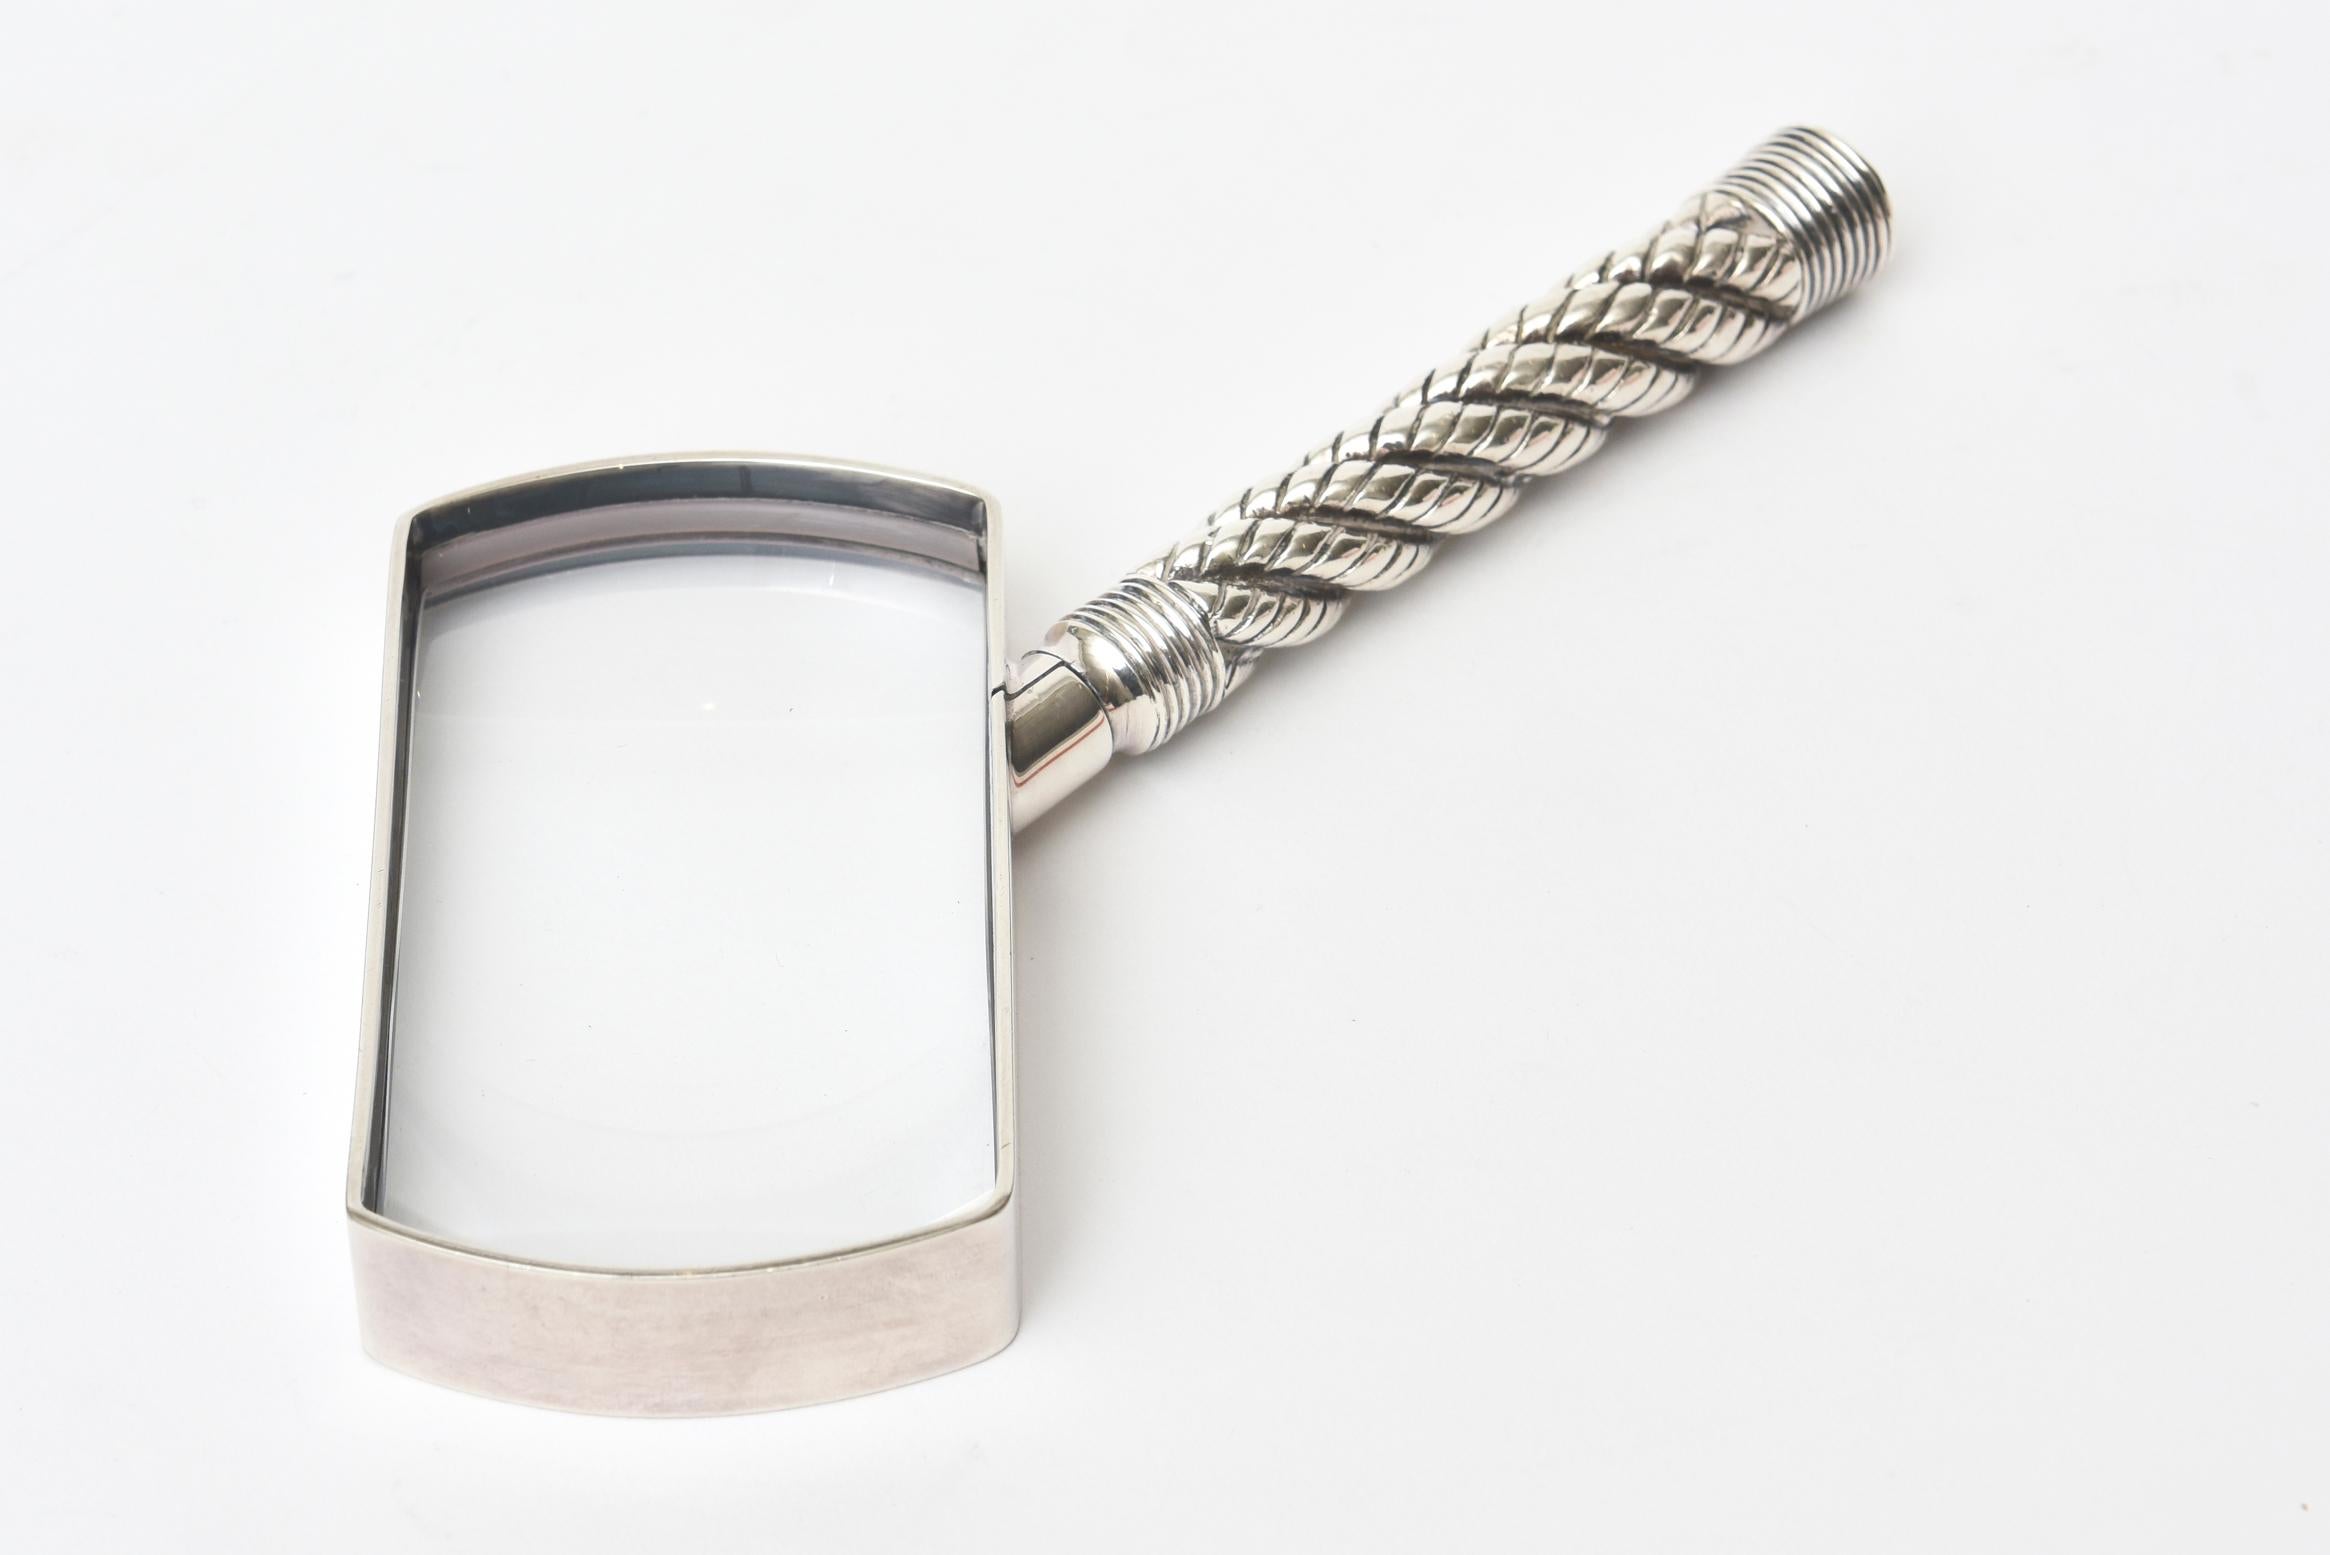 Hermès Vintage Silver- Plate Angled Rope Magnifier Desk Accessory In Good Condition For Sale In North Miami, FL